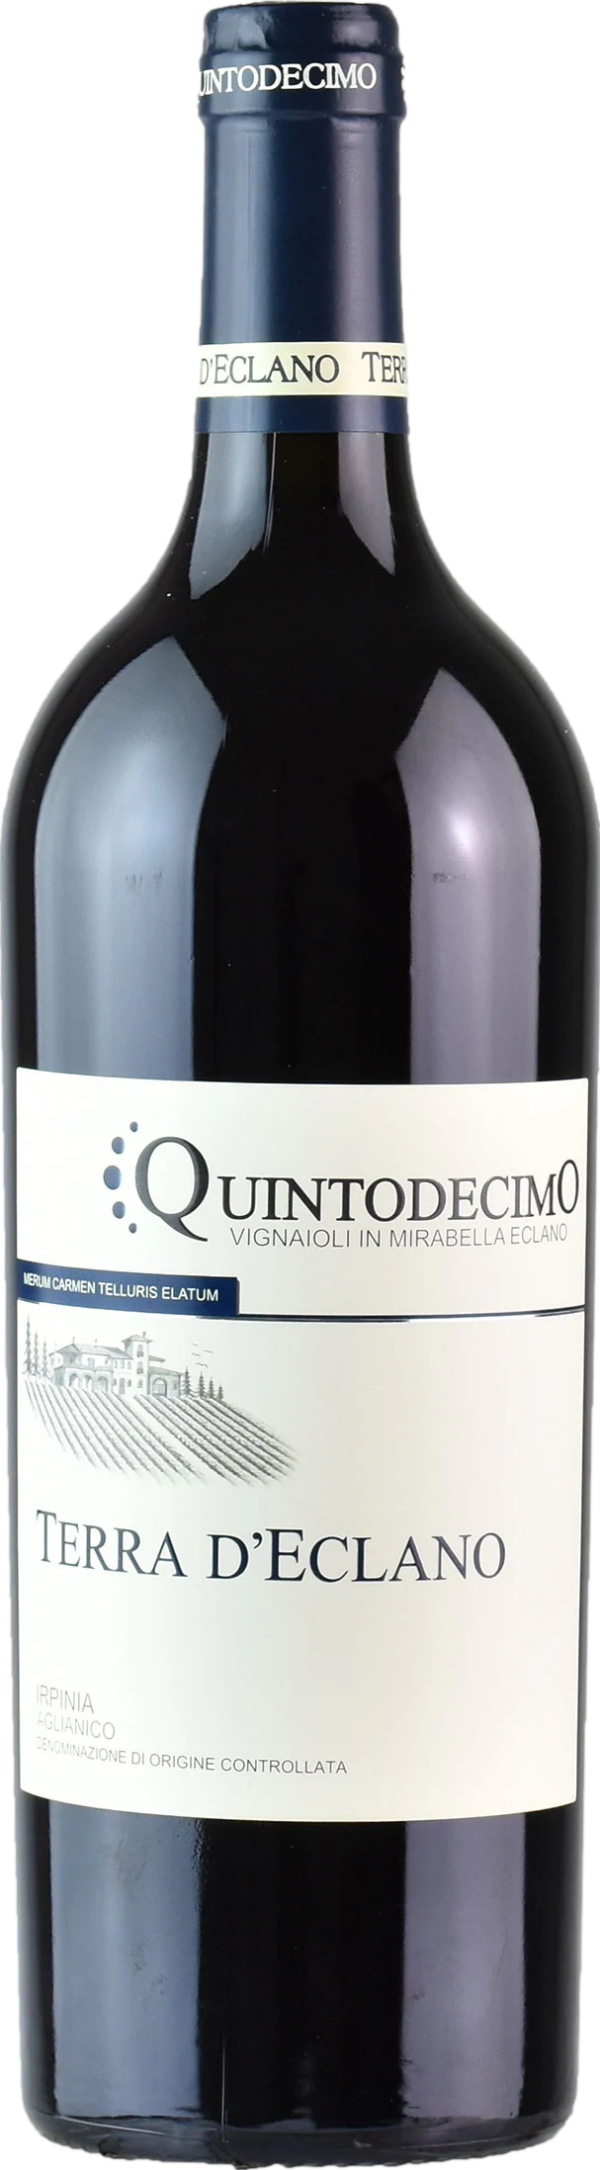 Product image of Quintodecimo Terra d'Eclano Aglianico 2020 from 8wines